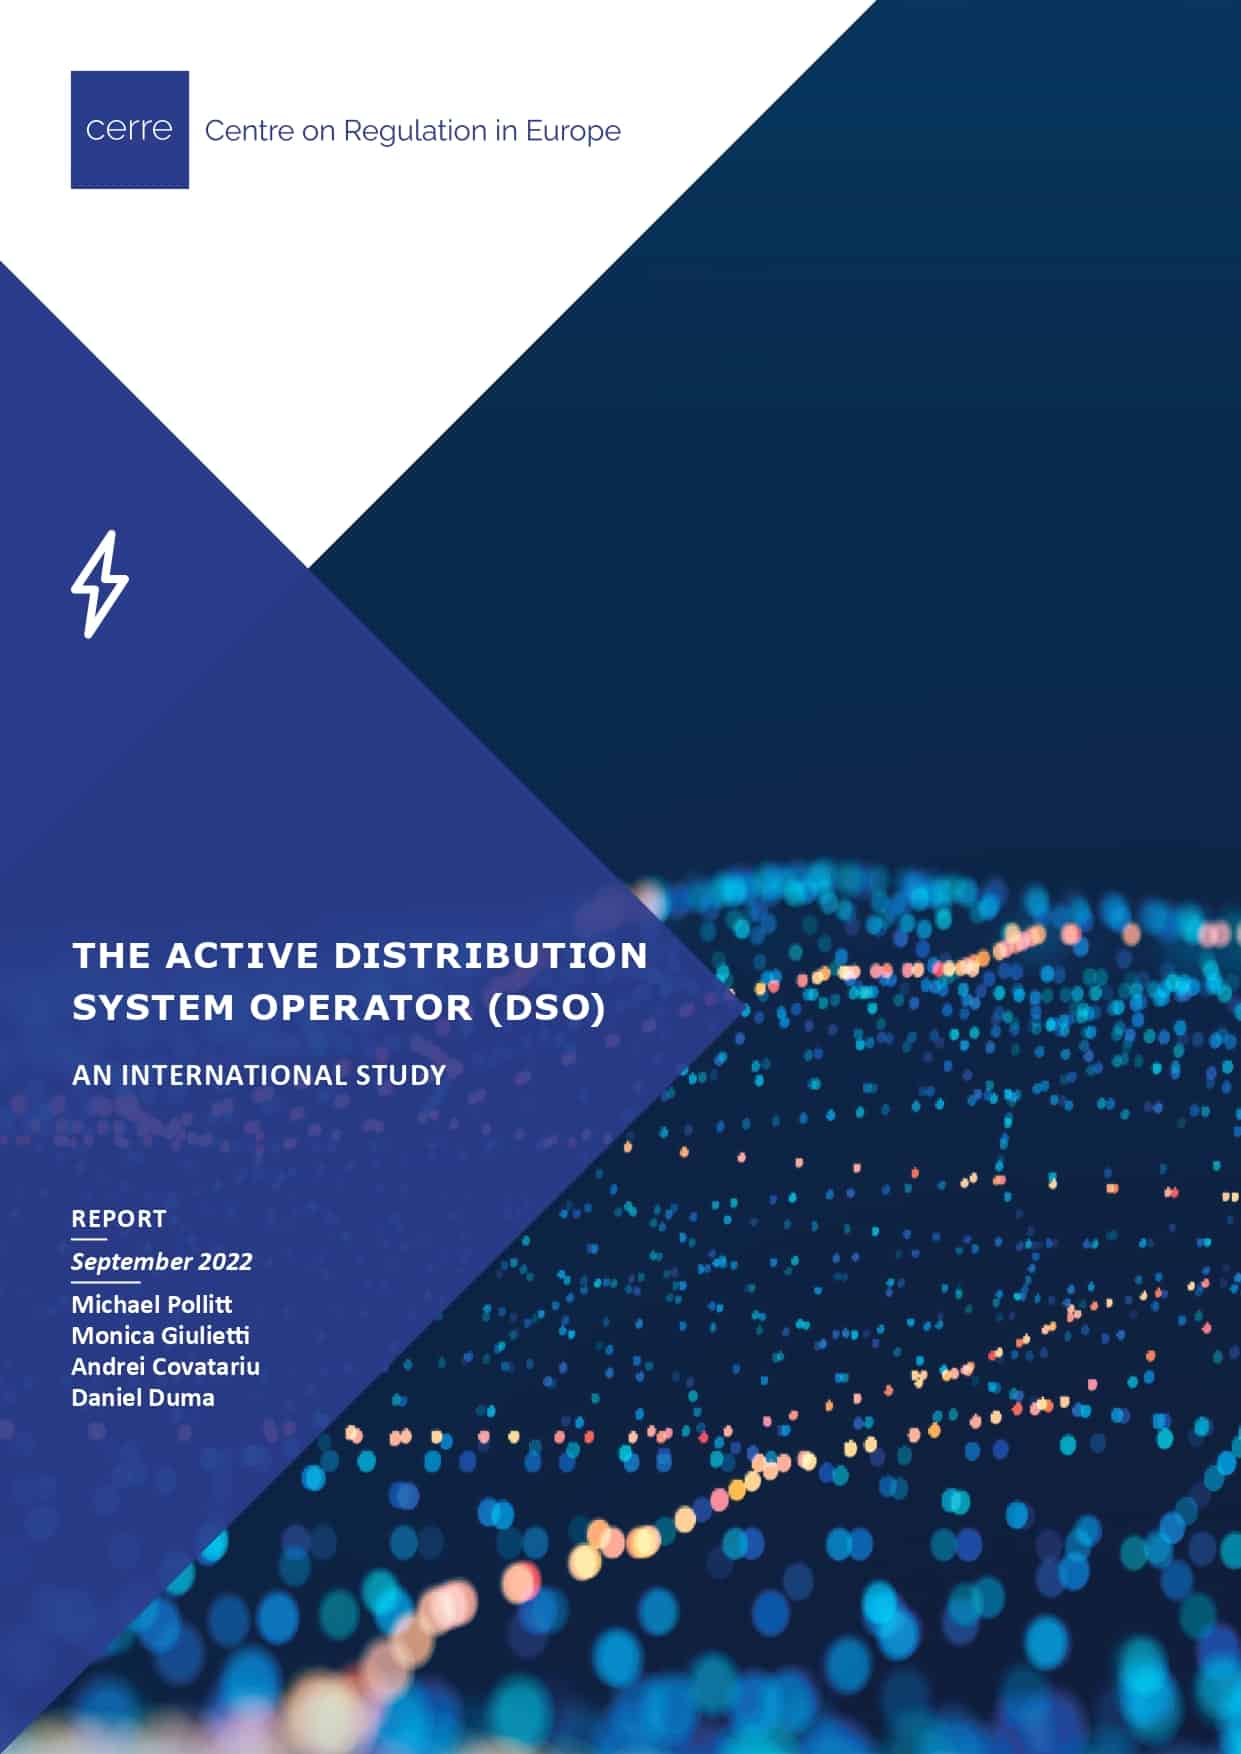 The Active Distribution System Operator (DSO)